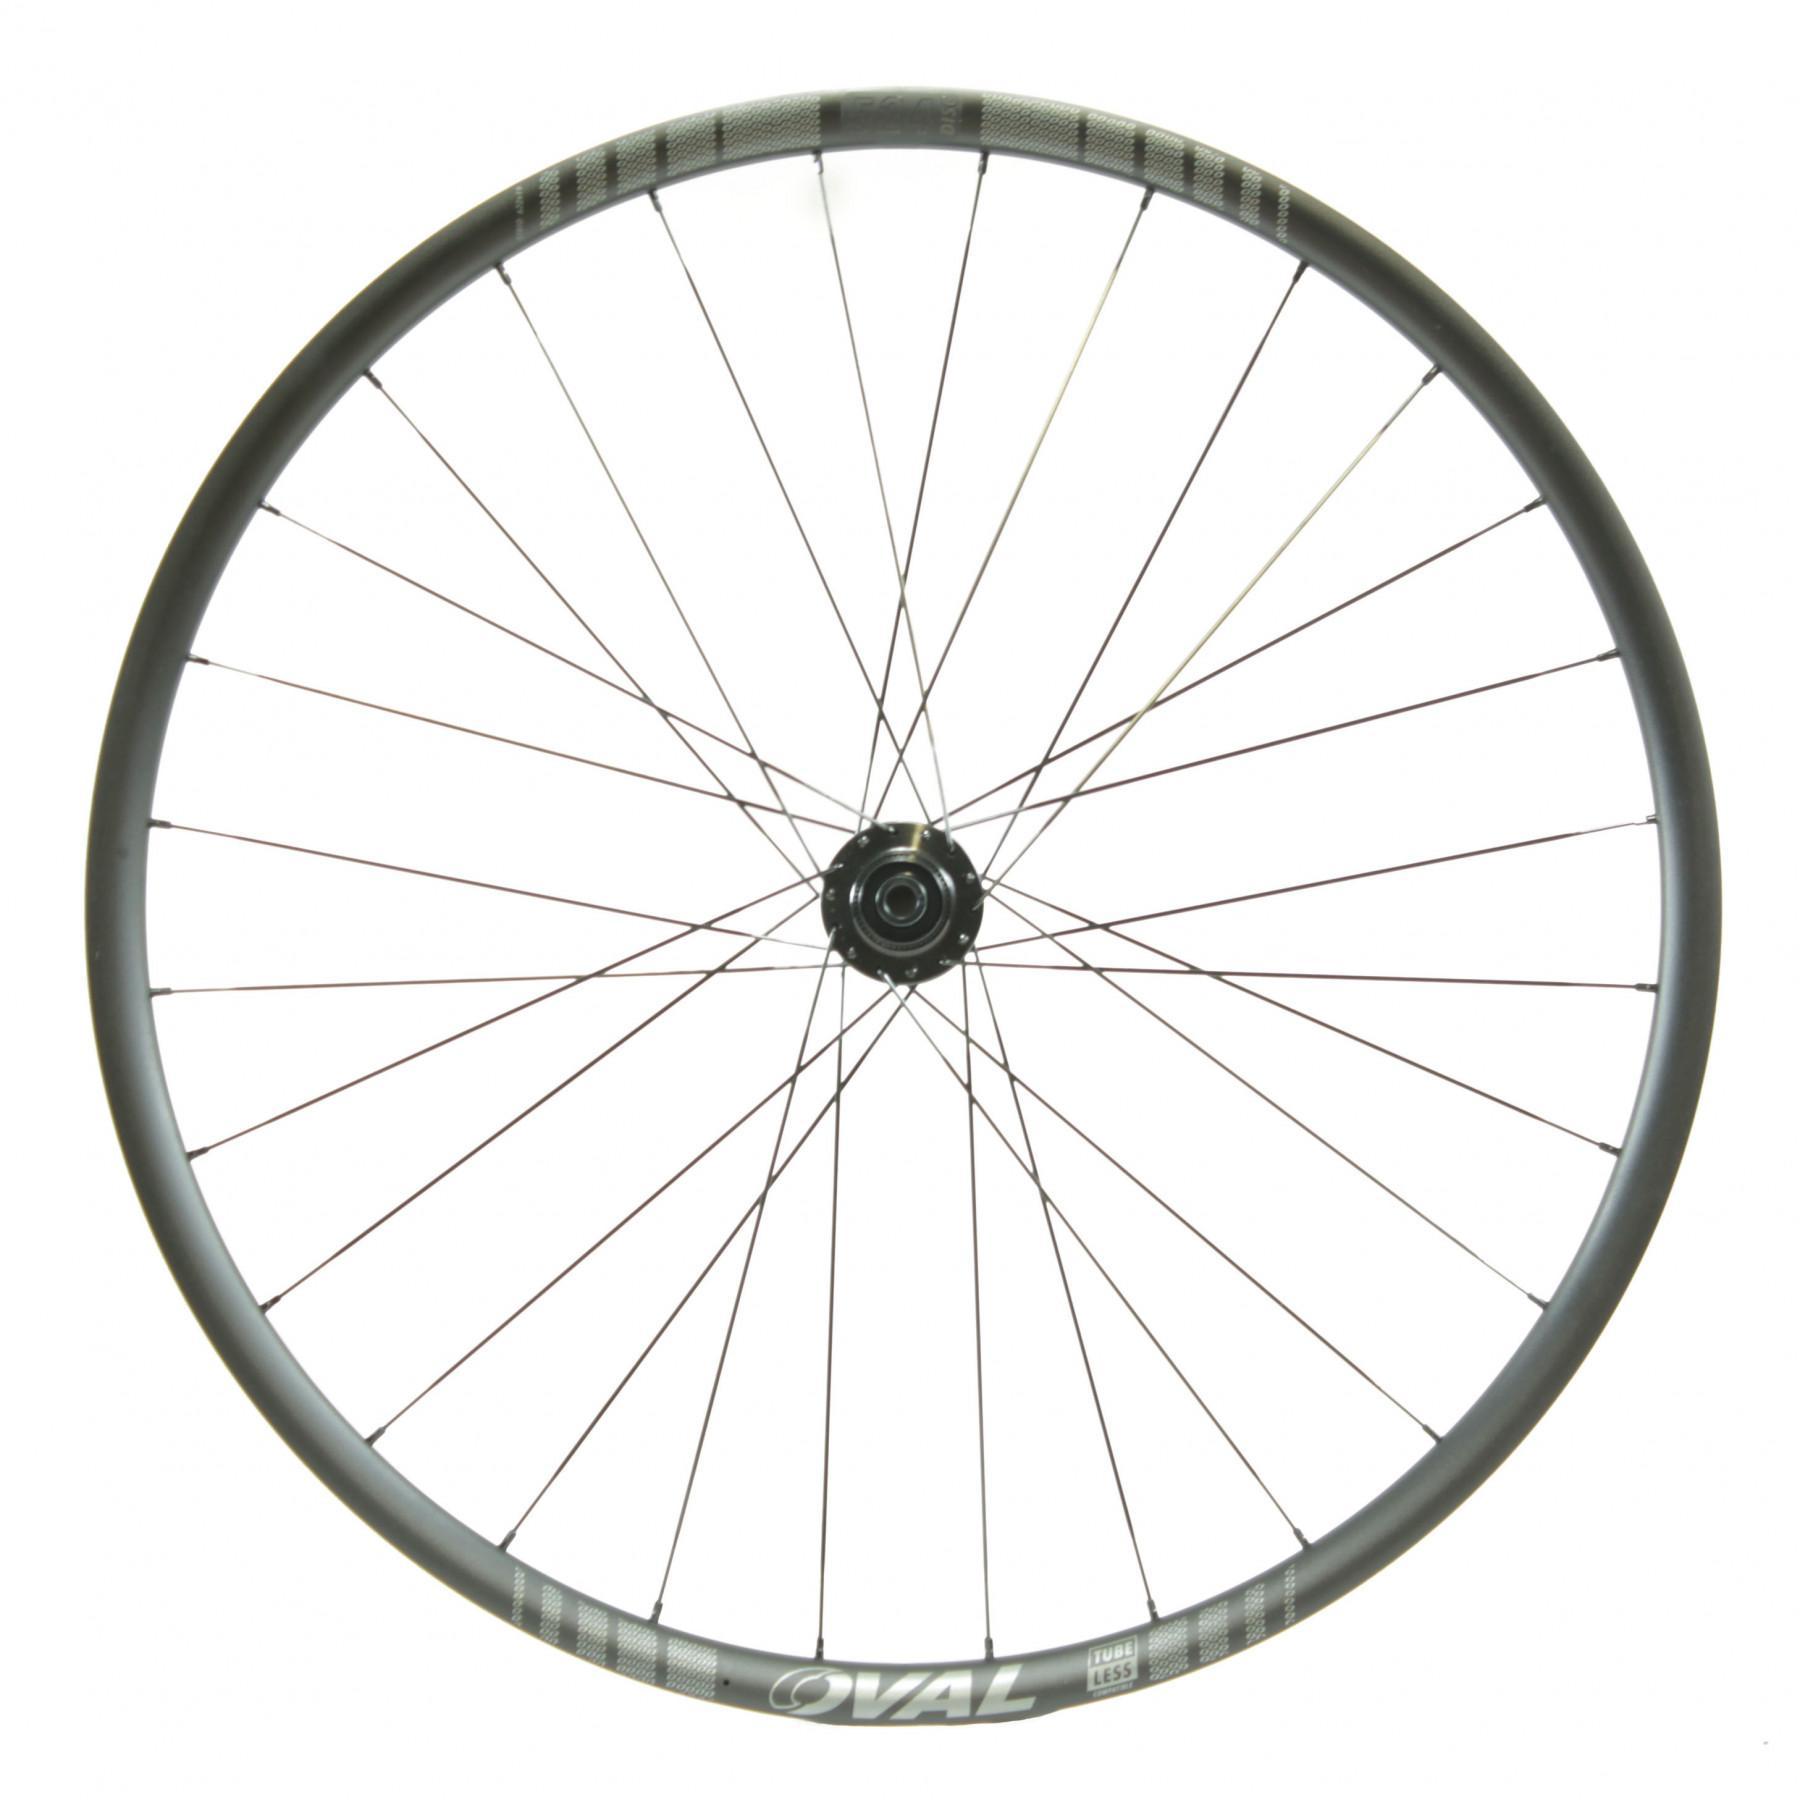 Räder Oval concepts Oval 524 Disc TA